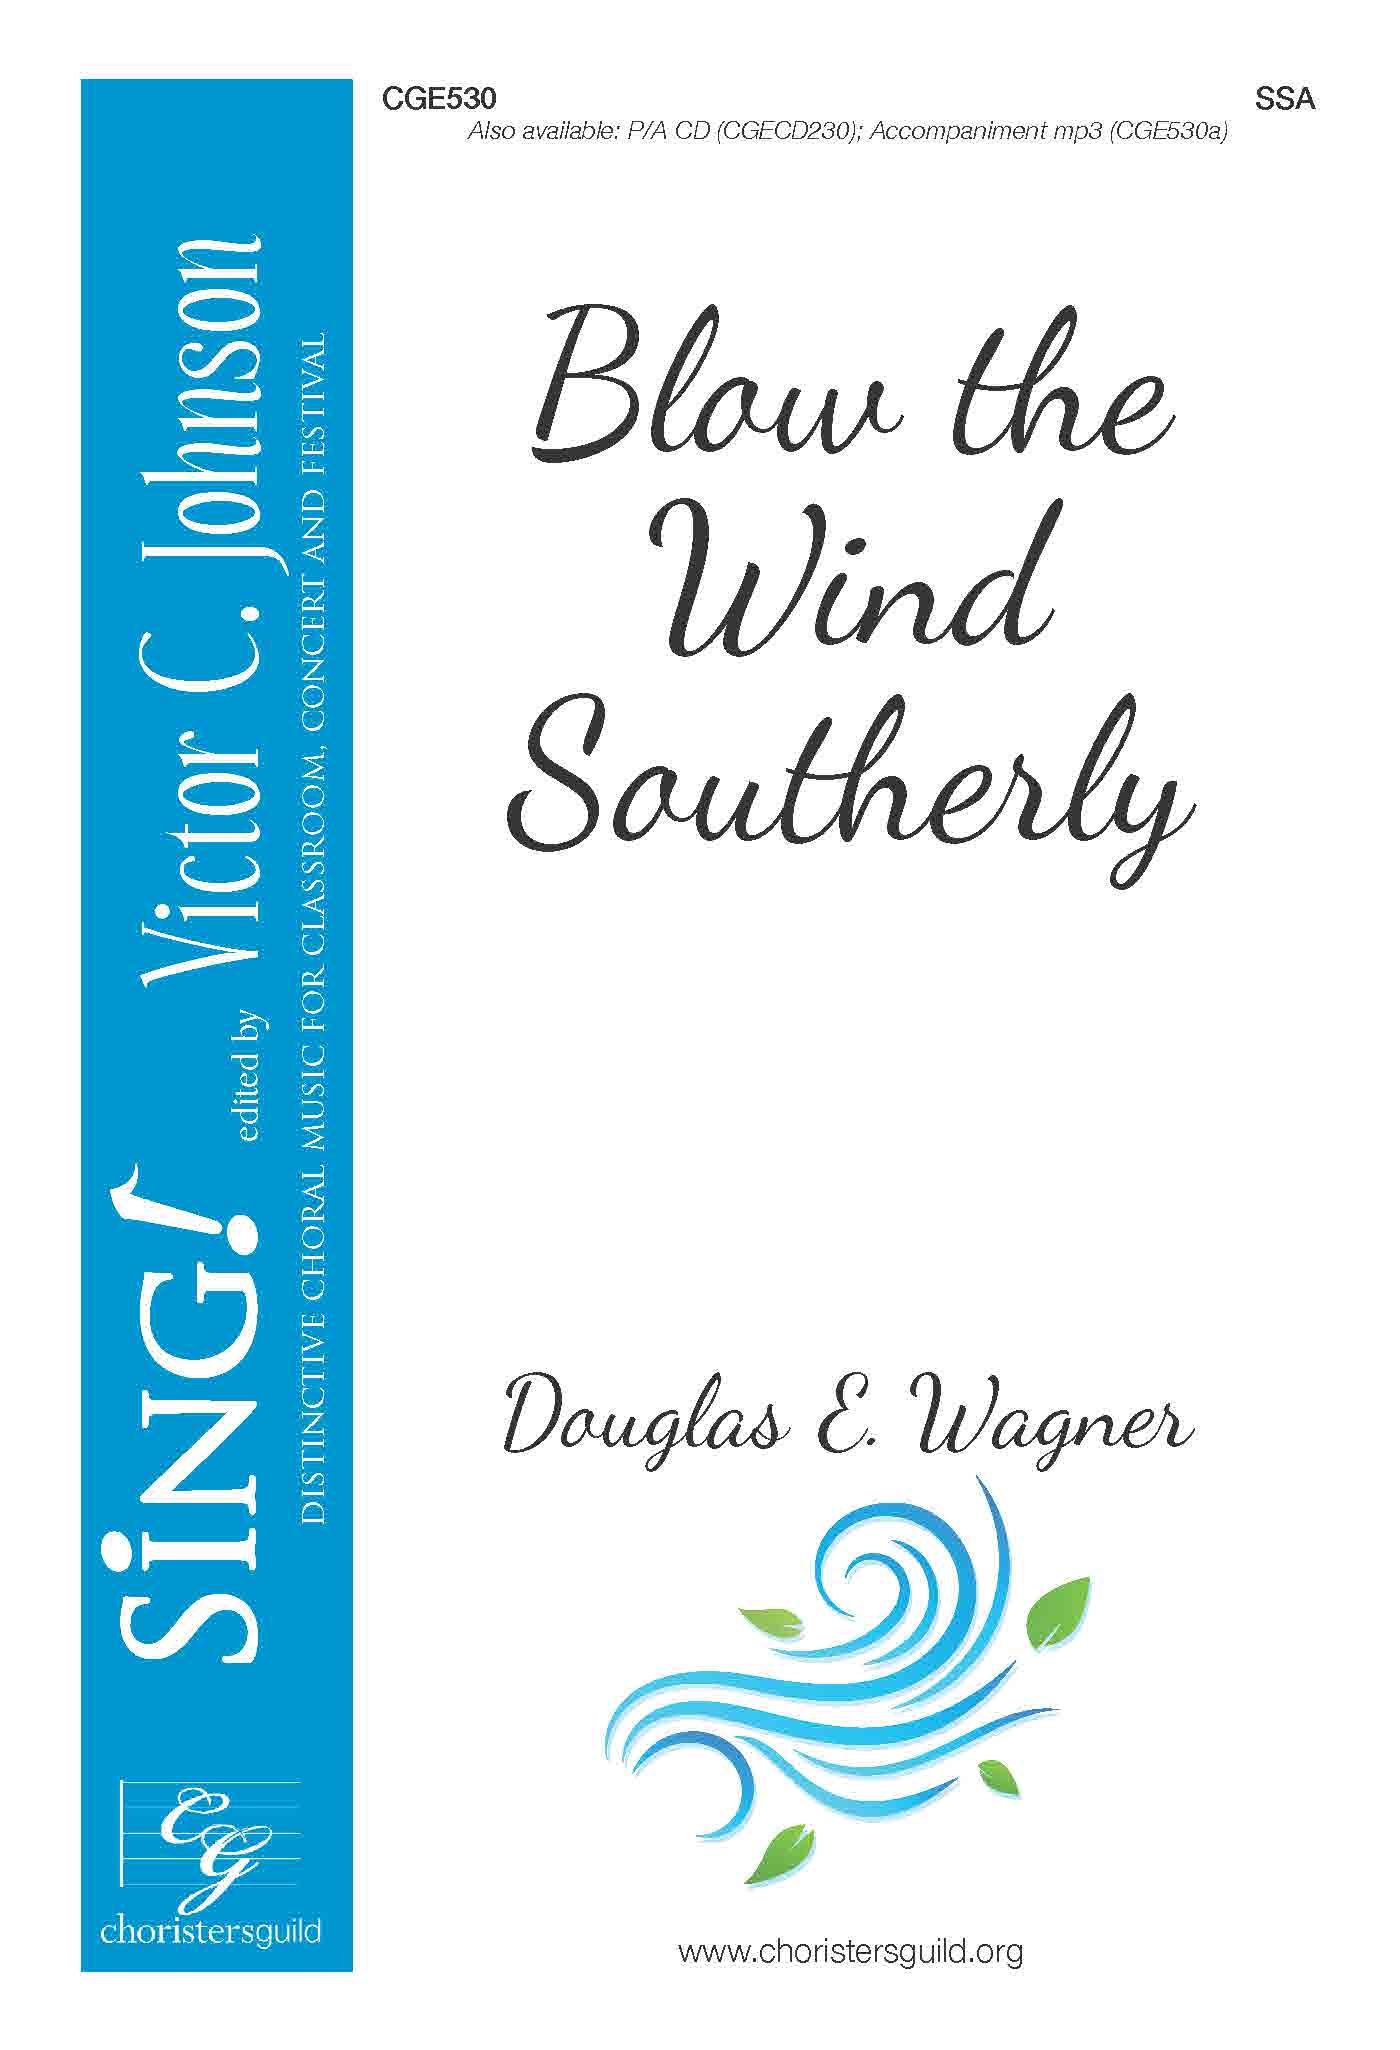 Blow the Wind Southerly - SSA